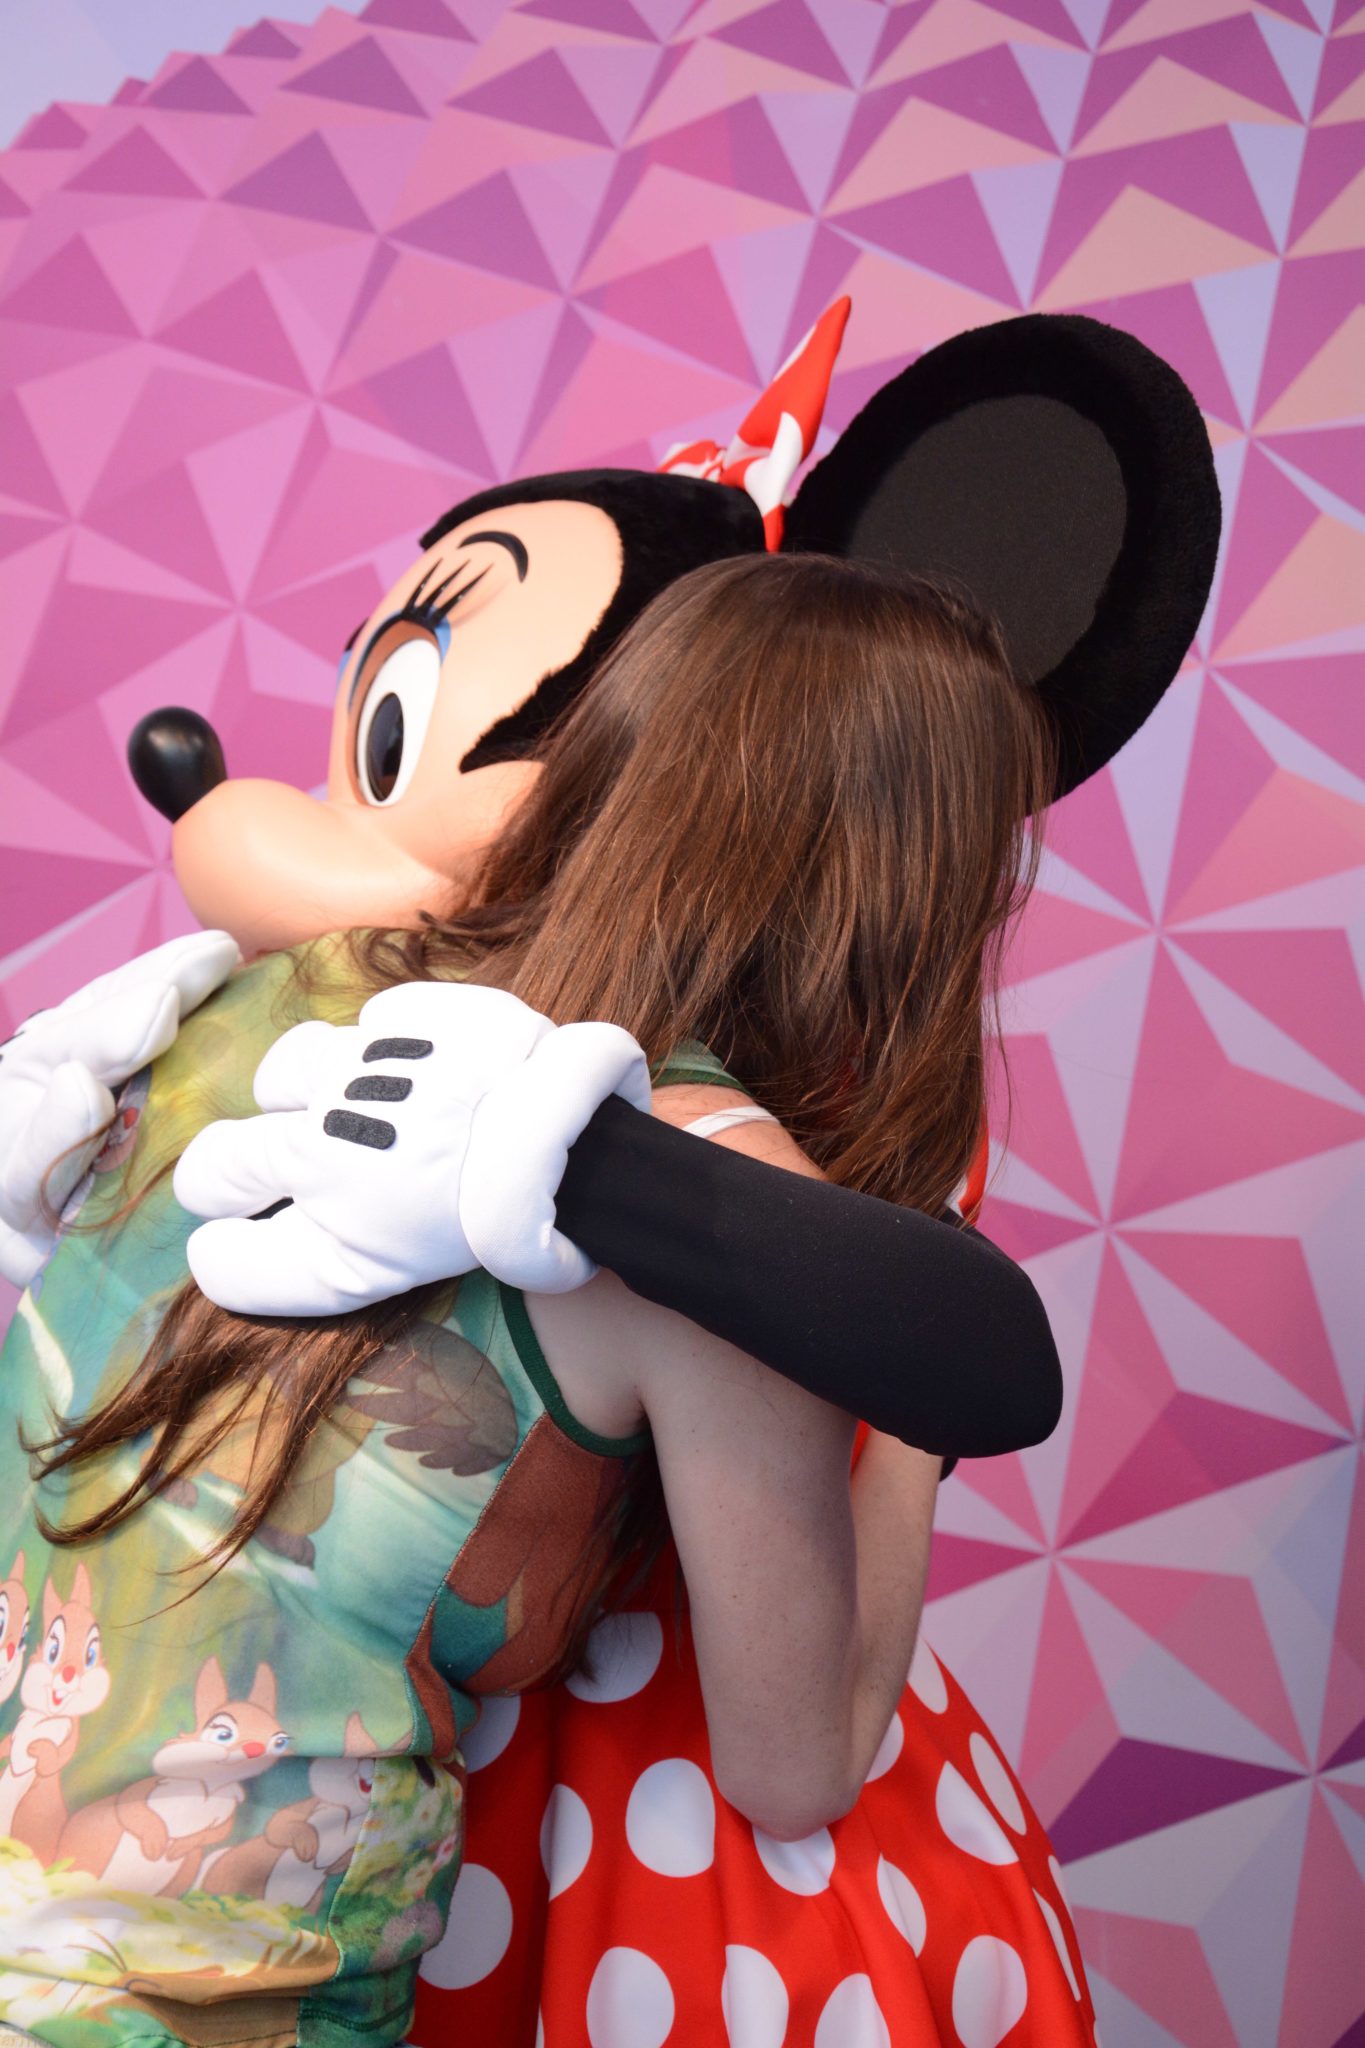 Chelsea gets a big hug from Minnie Mouse at the Visa Photo Spot.